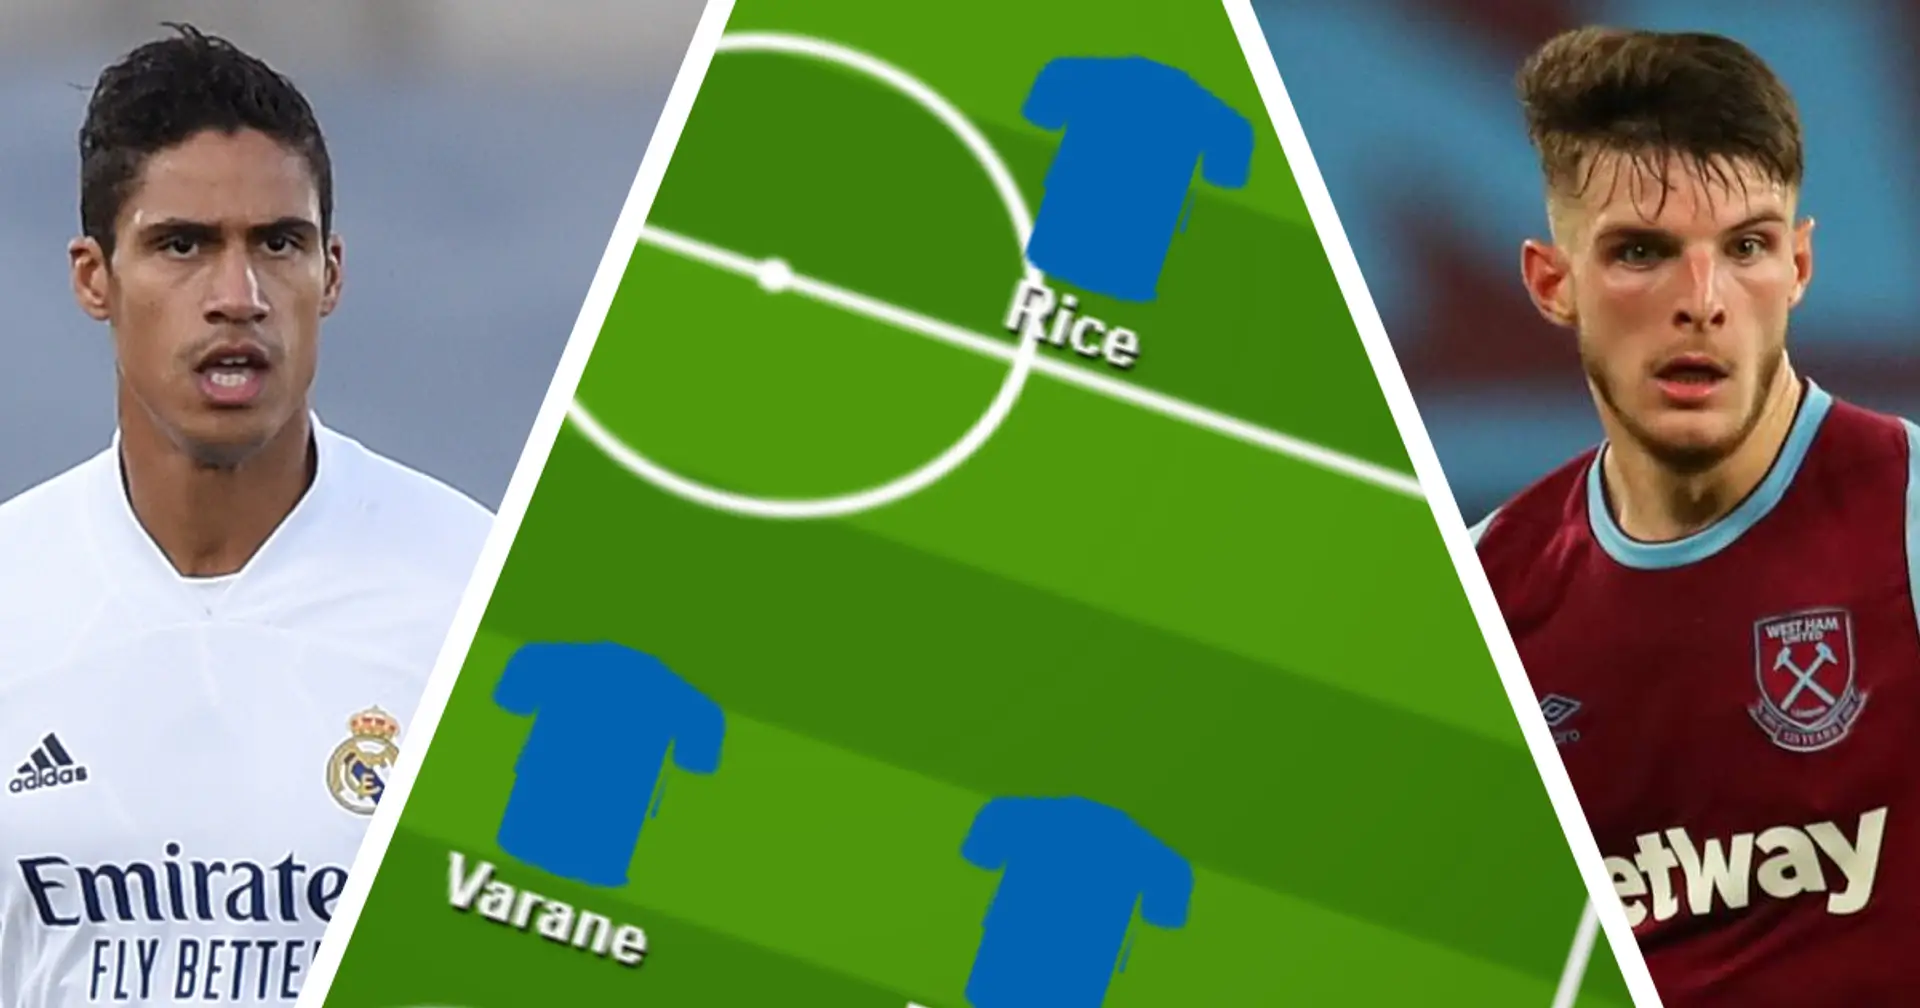 What Chelsea could look like with Varane or Rice in - 2 potential line-ups